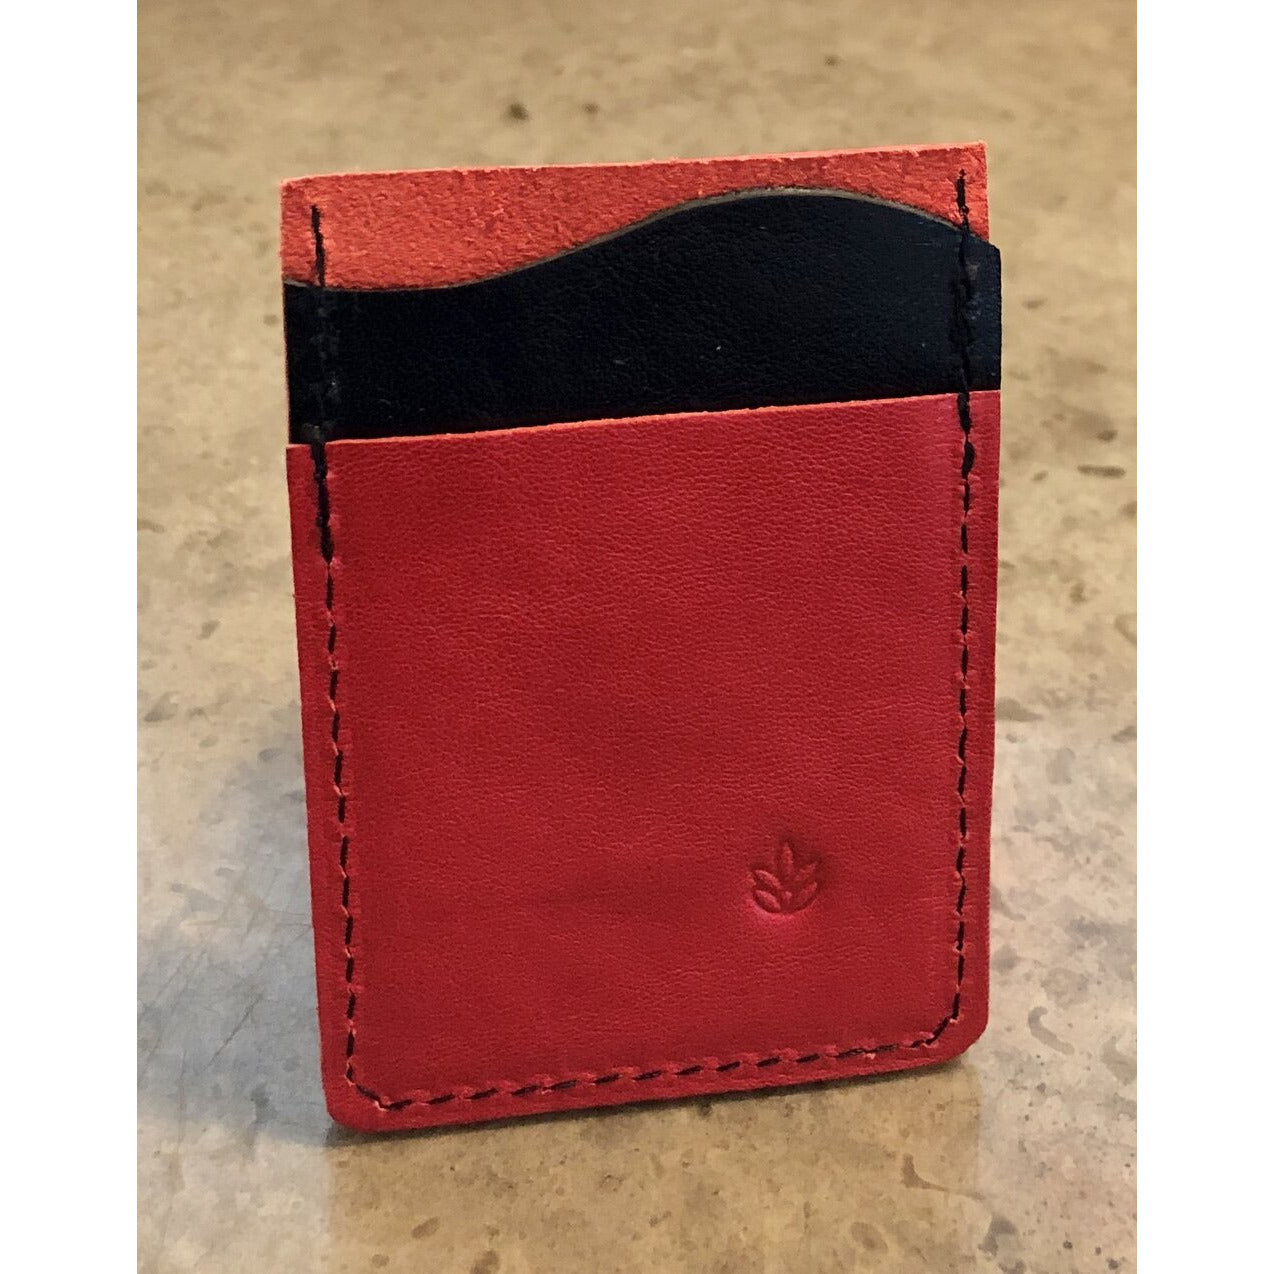 "Just the Essentials" Leather Card Wallet backside view in red and black